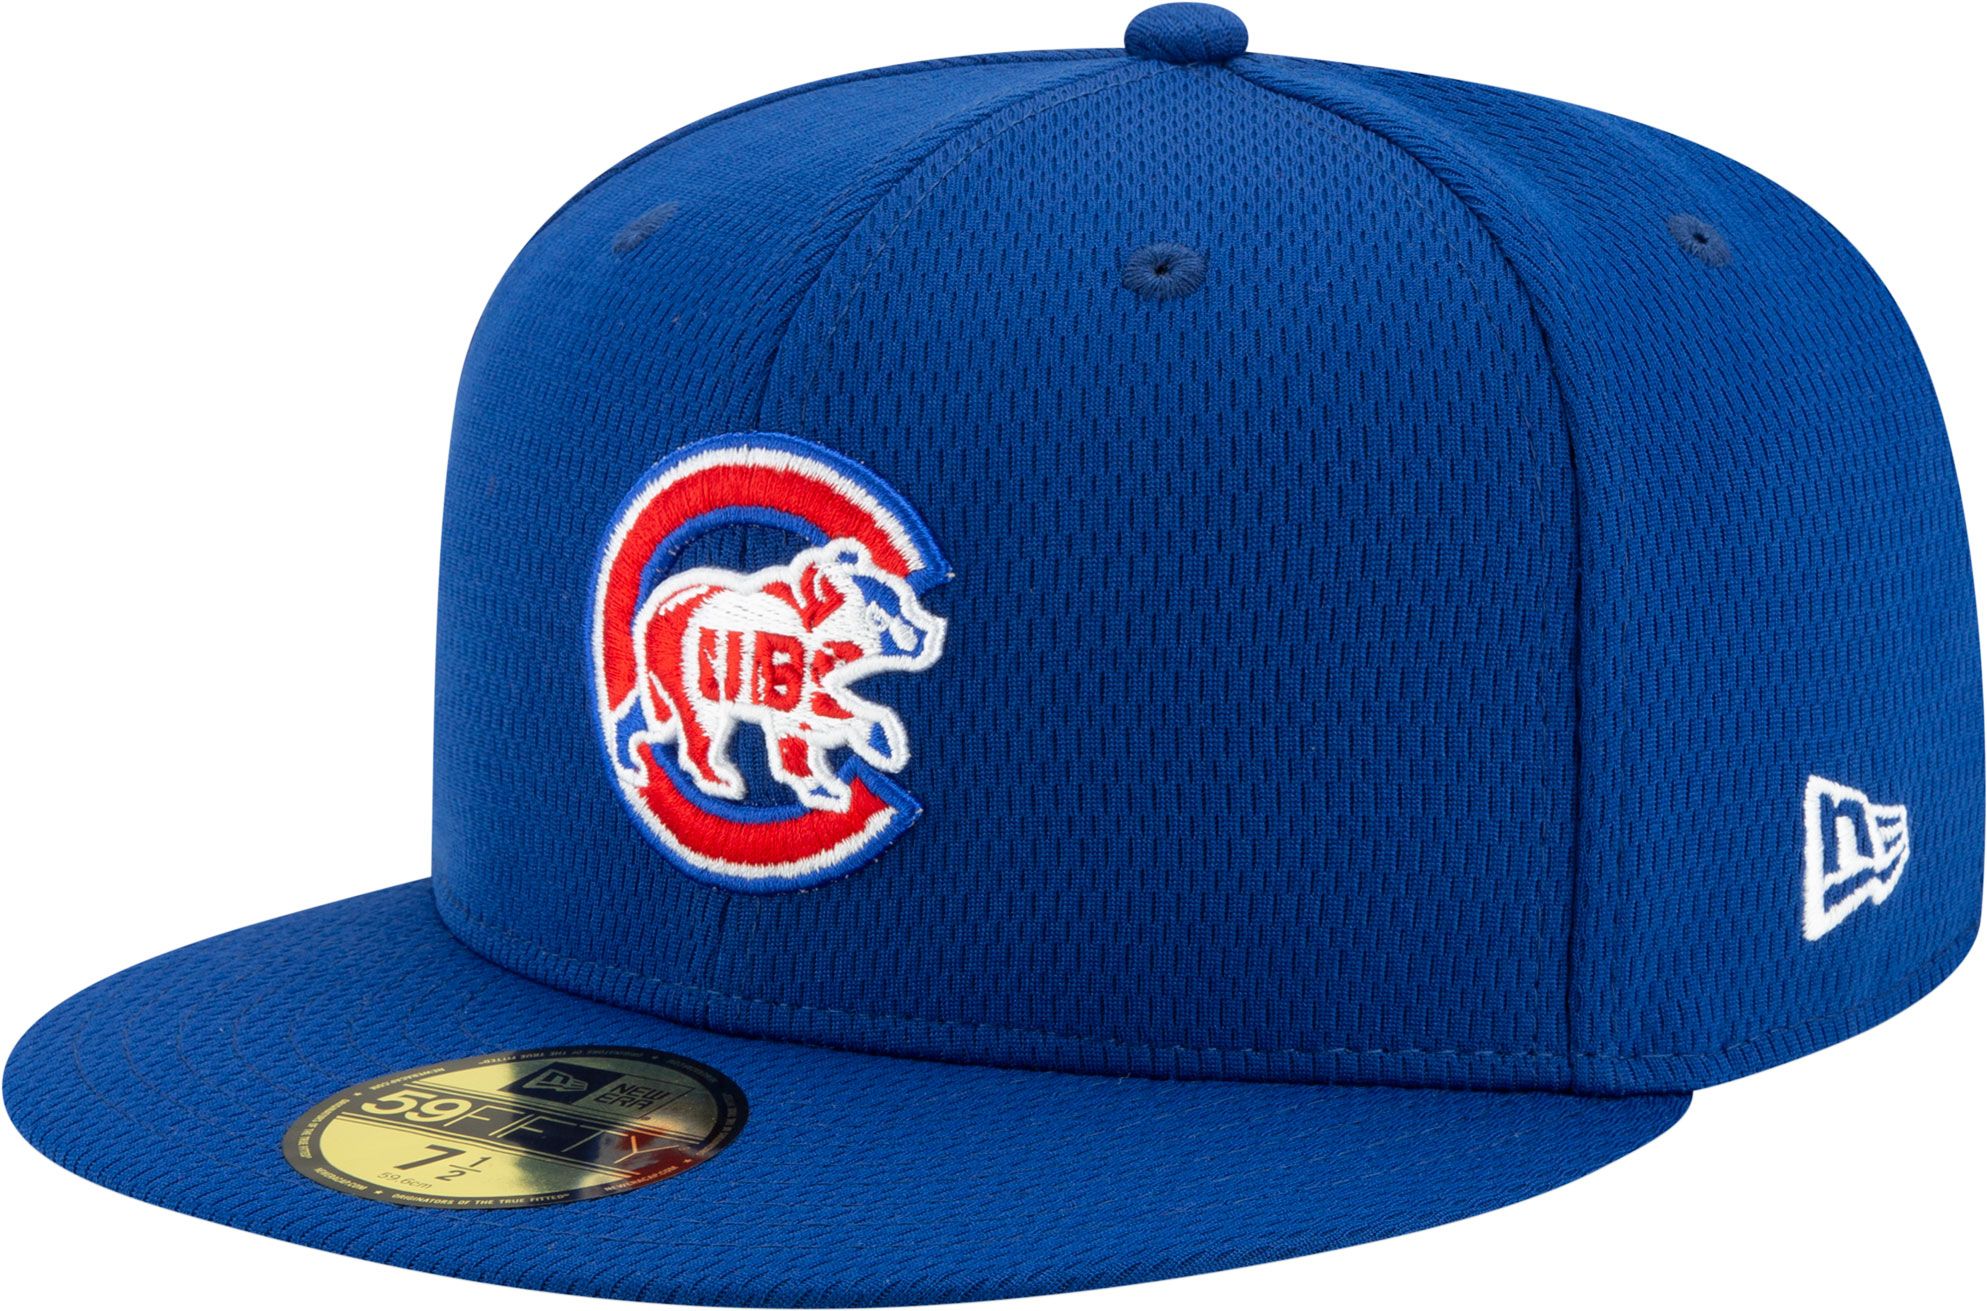 cubs spring training hat 2020